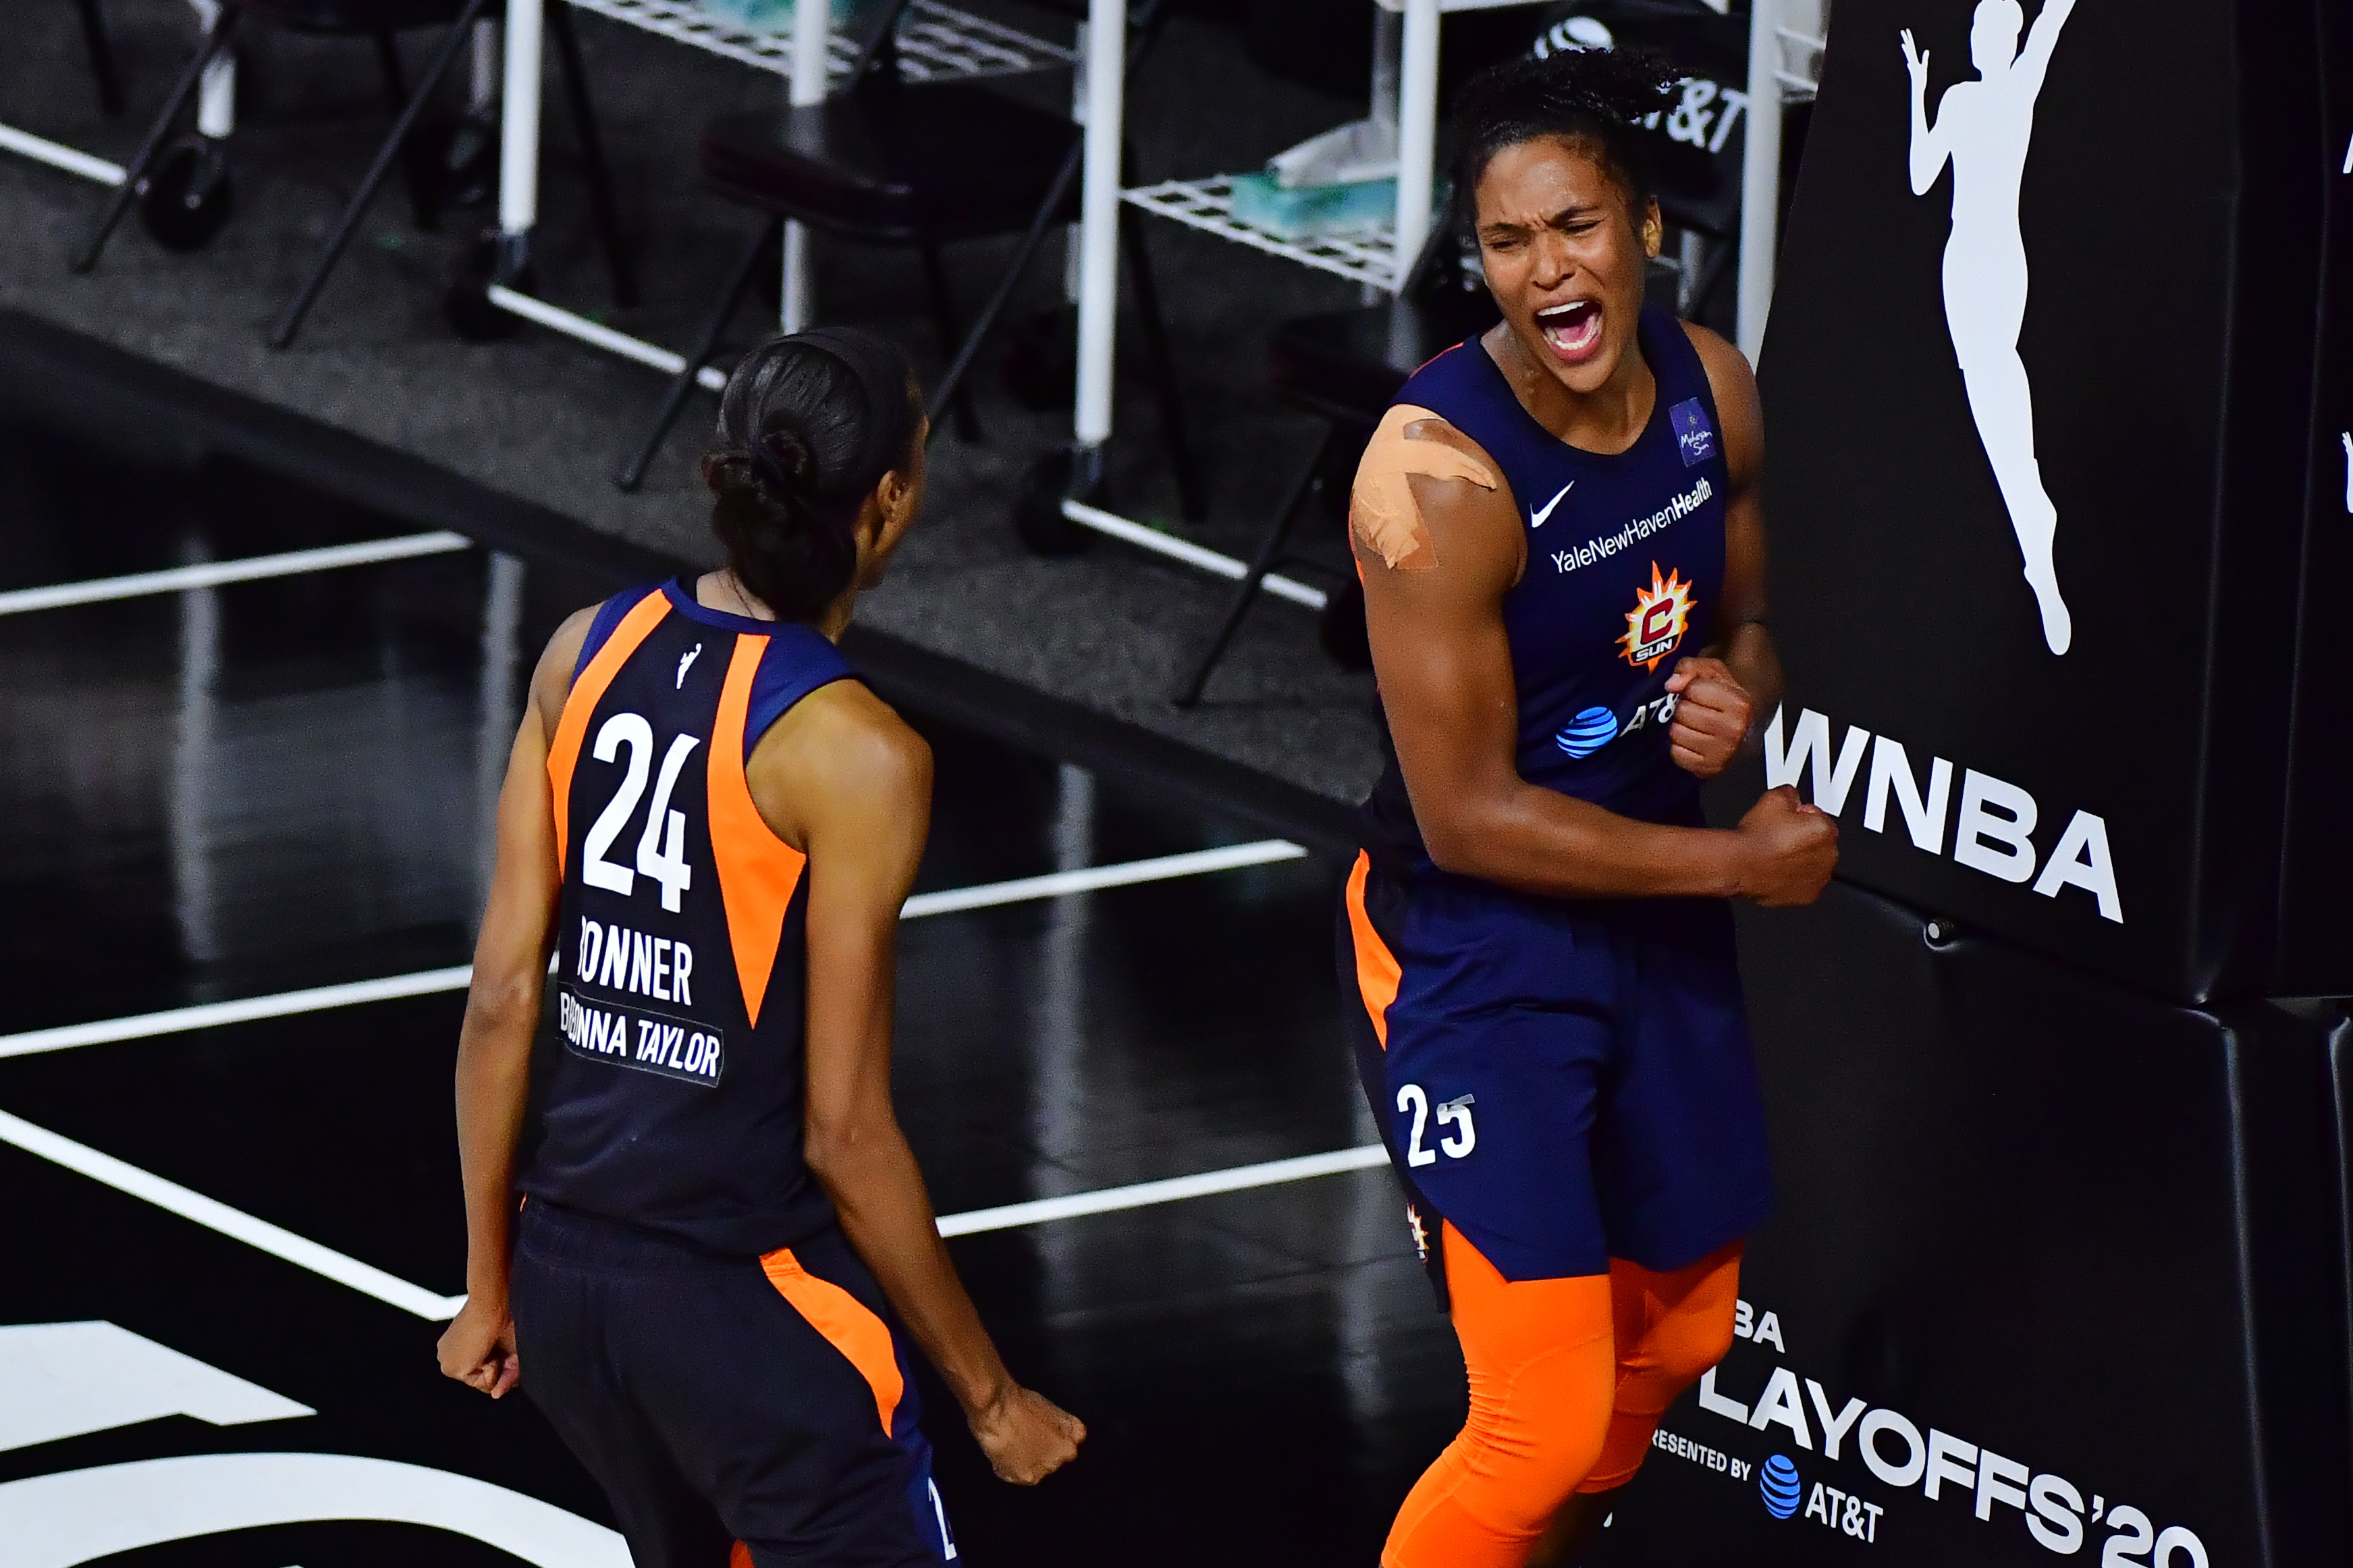 Alyssa Thomas #25 of the Connecticut Sun celebrates with DeWanna Bonner #24 after converting a steal in the fourth quarter against the Las Vegas Aces during Game Three of their Third Round playoff at Feld Entertainment Center on September 24, 2020 in Palmetto, Florida.